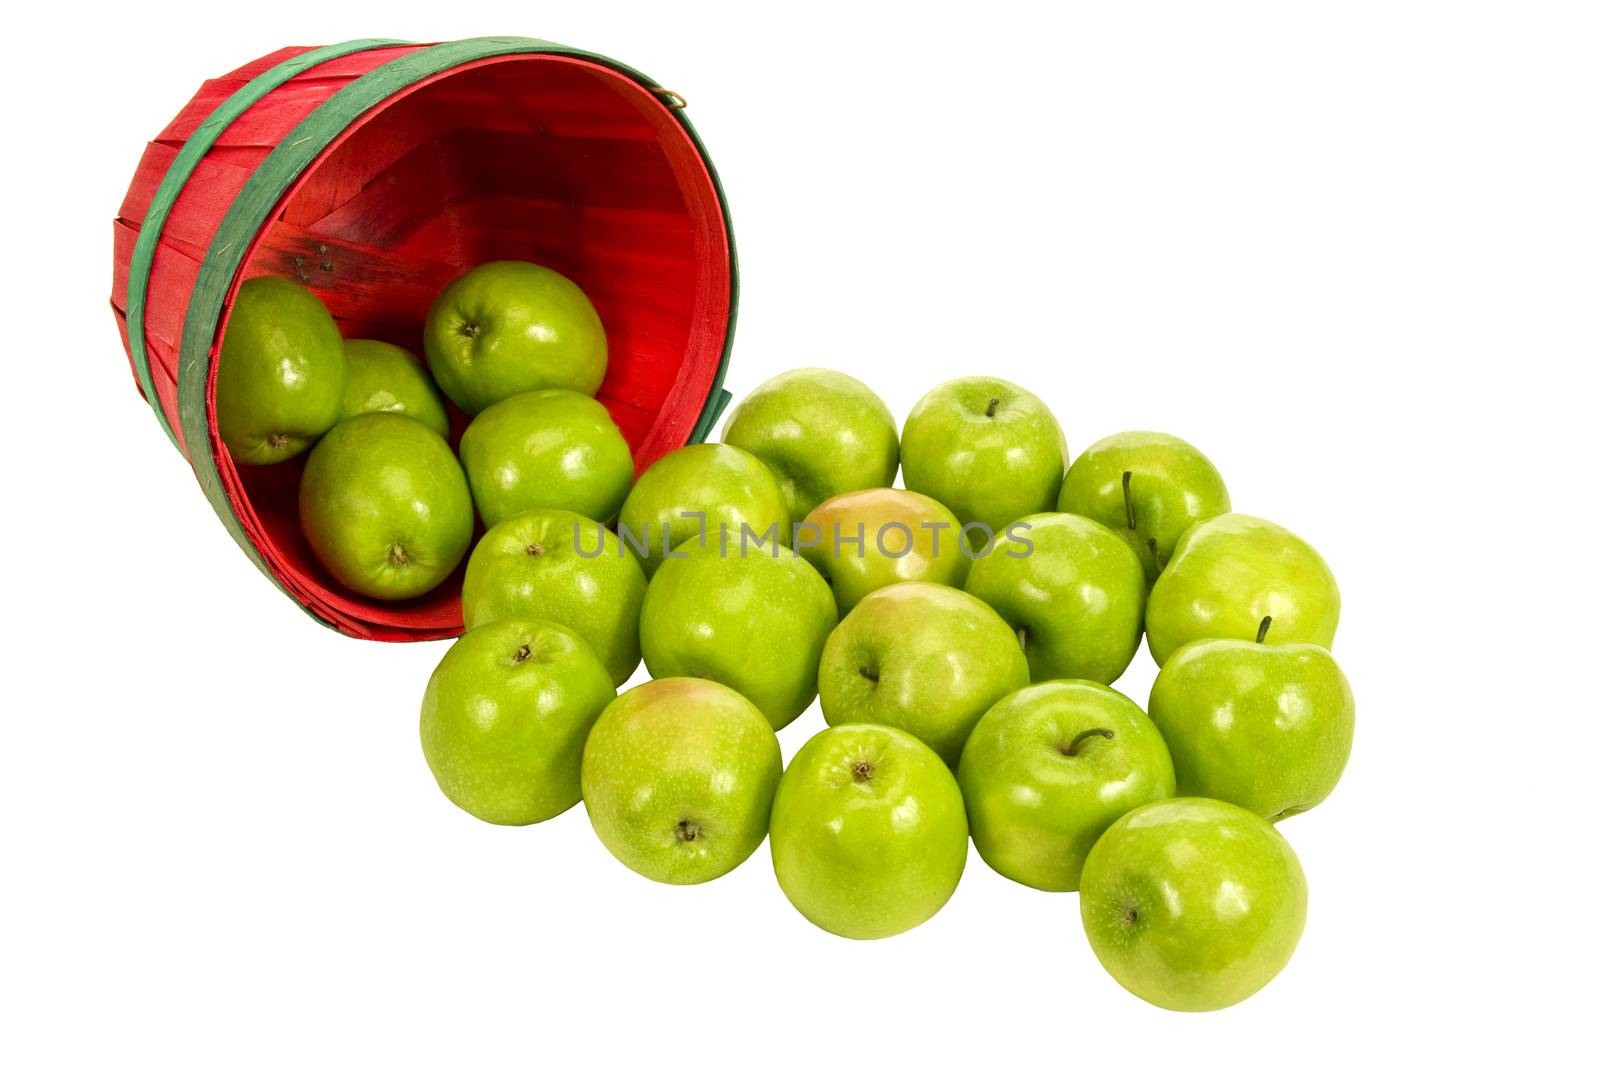 Horizontal shot of a little red basket of green apples spilling out on white background